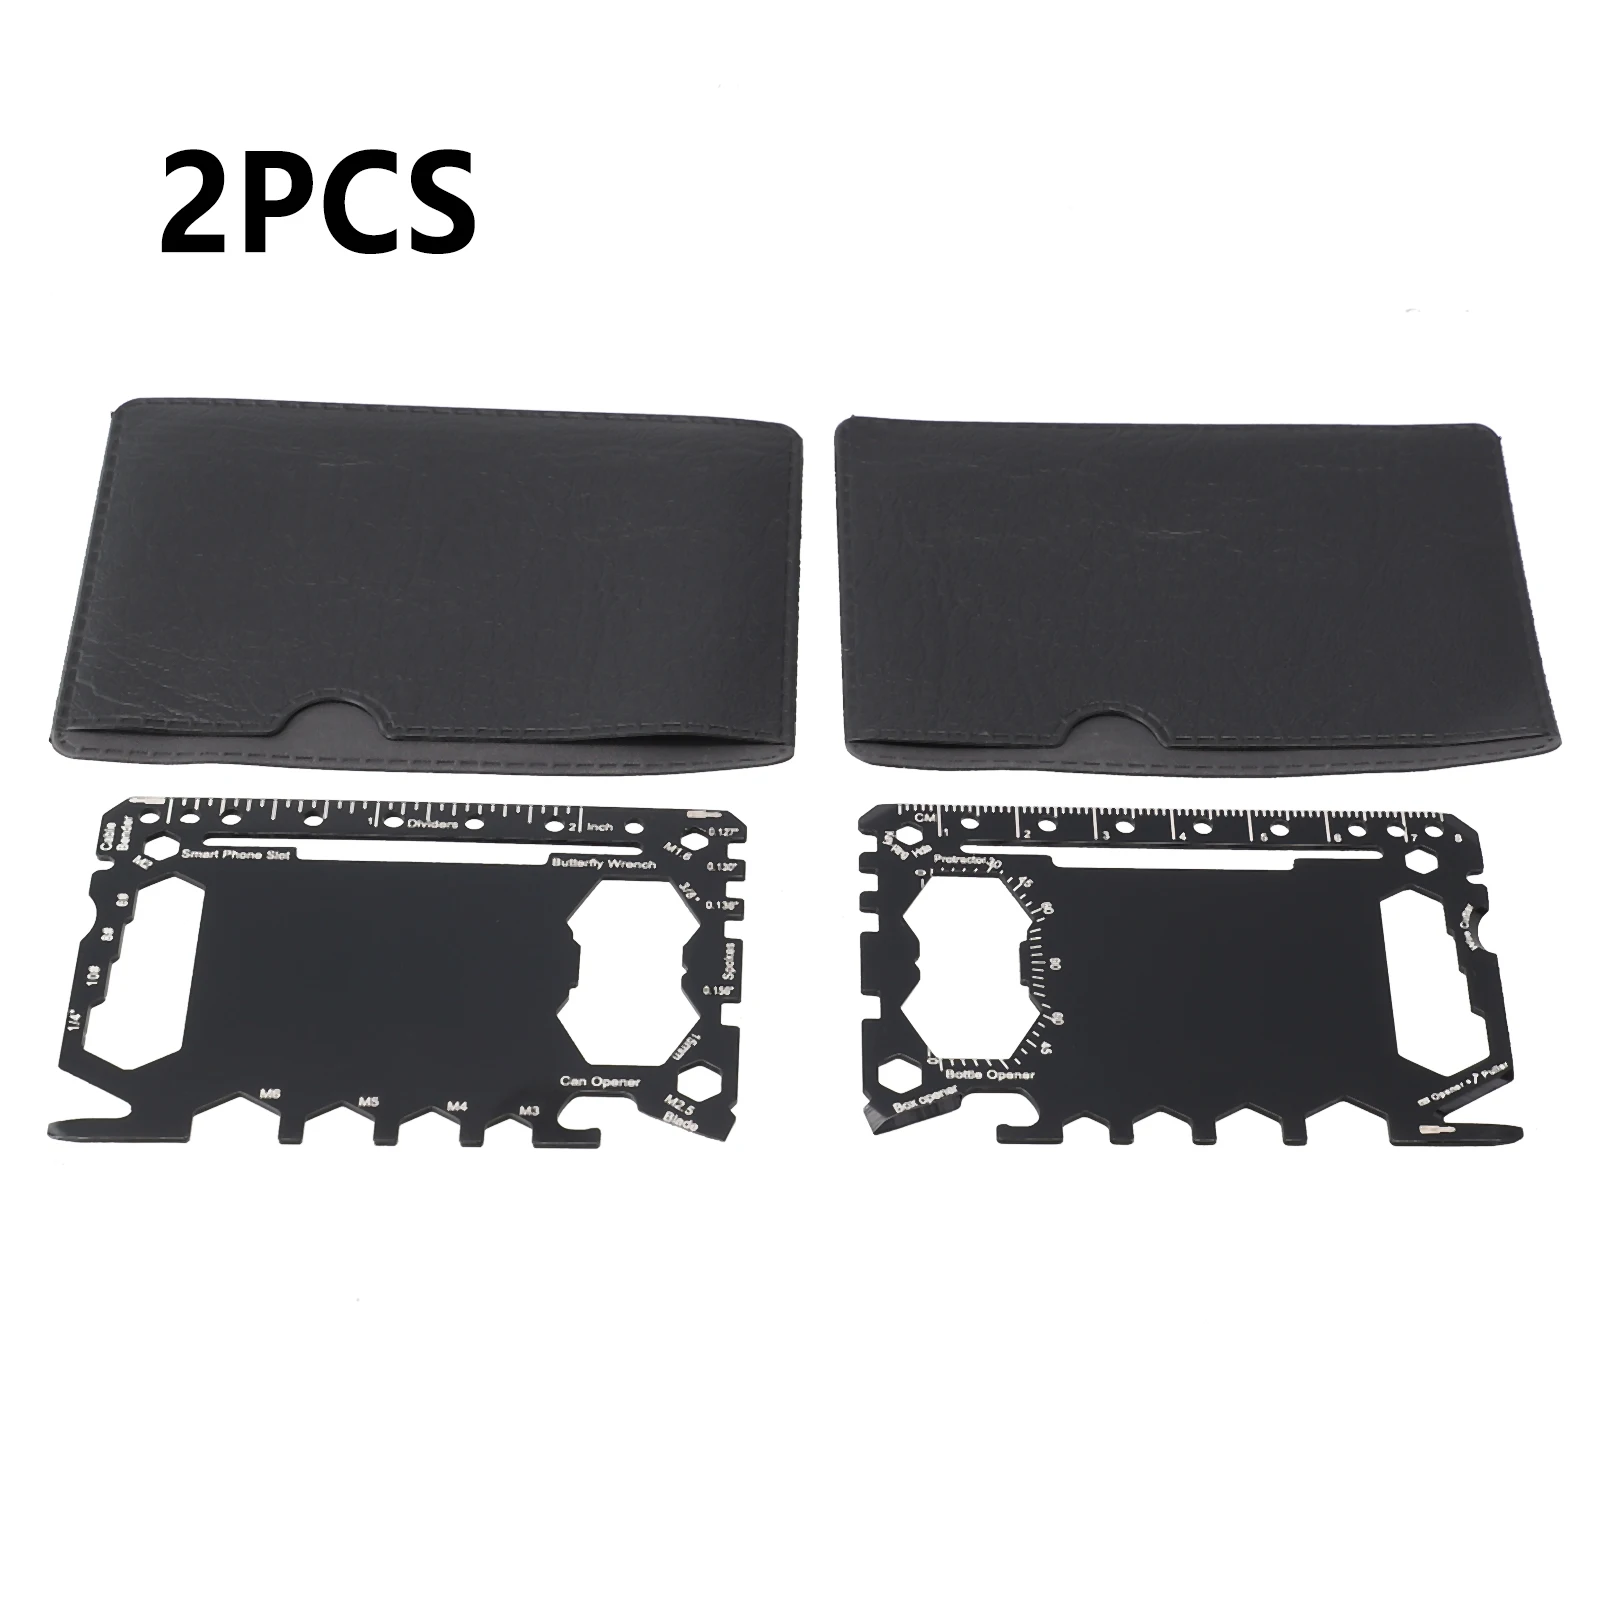 

Durable Repair Tool Gadgets Tool Card Parts 2 Pcs 420 Stainless Steel 88 * 55 * 1.2mm Accessories Black Hot Sale